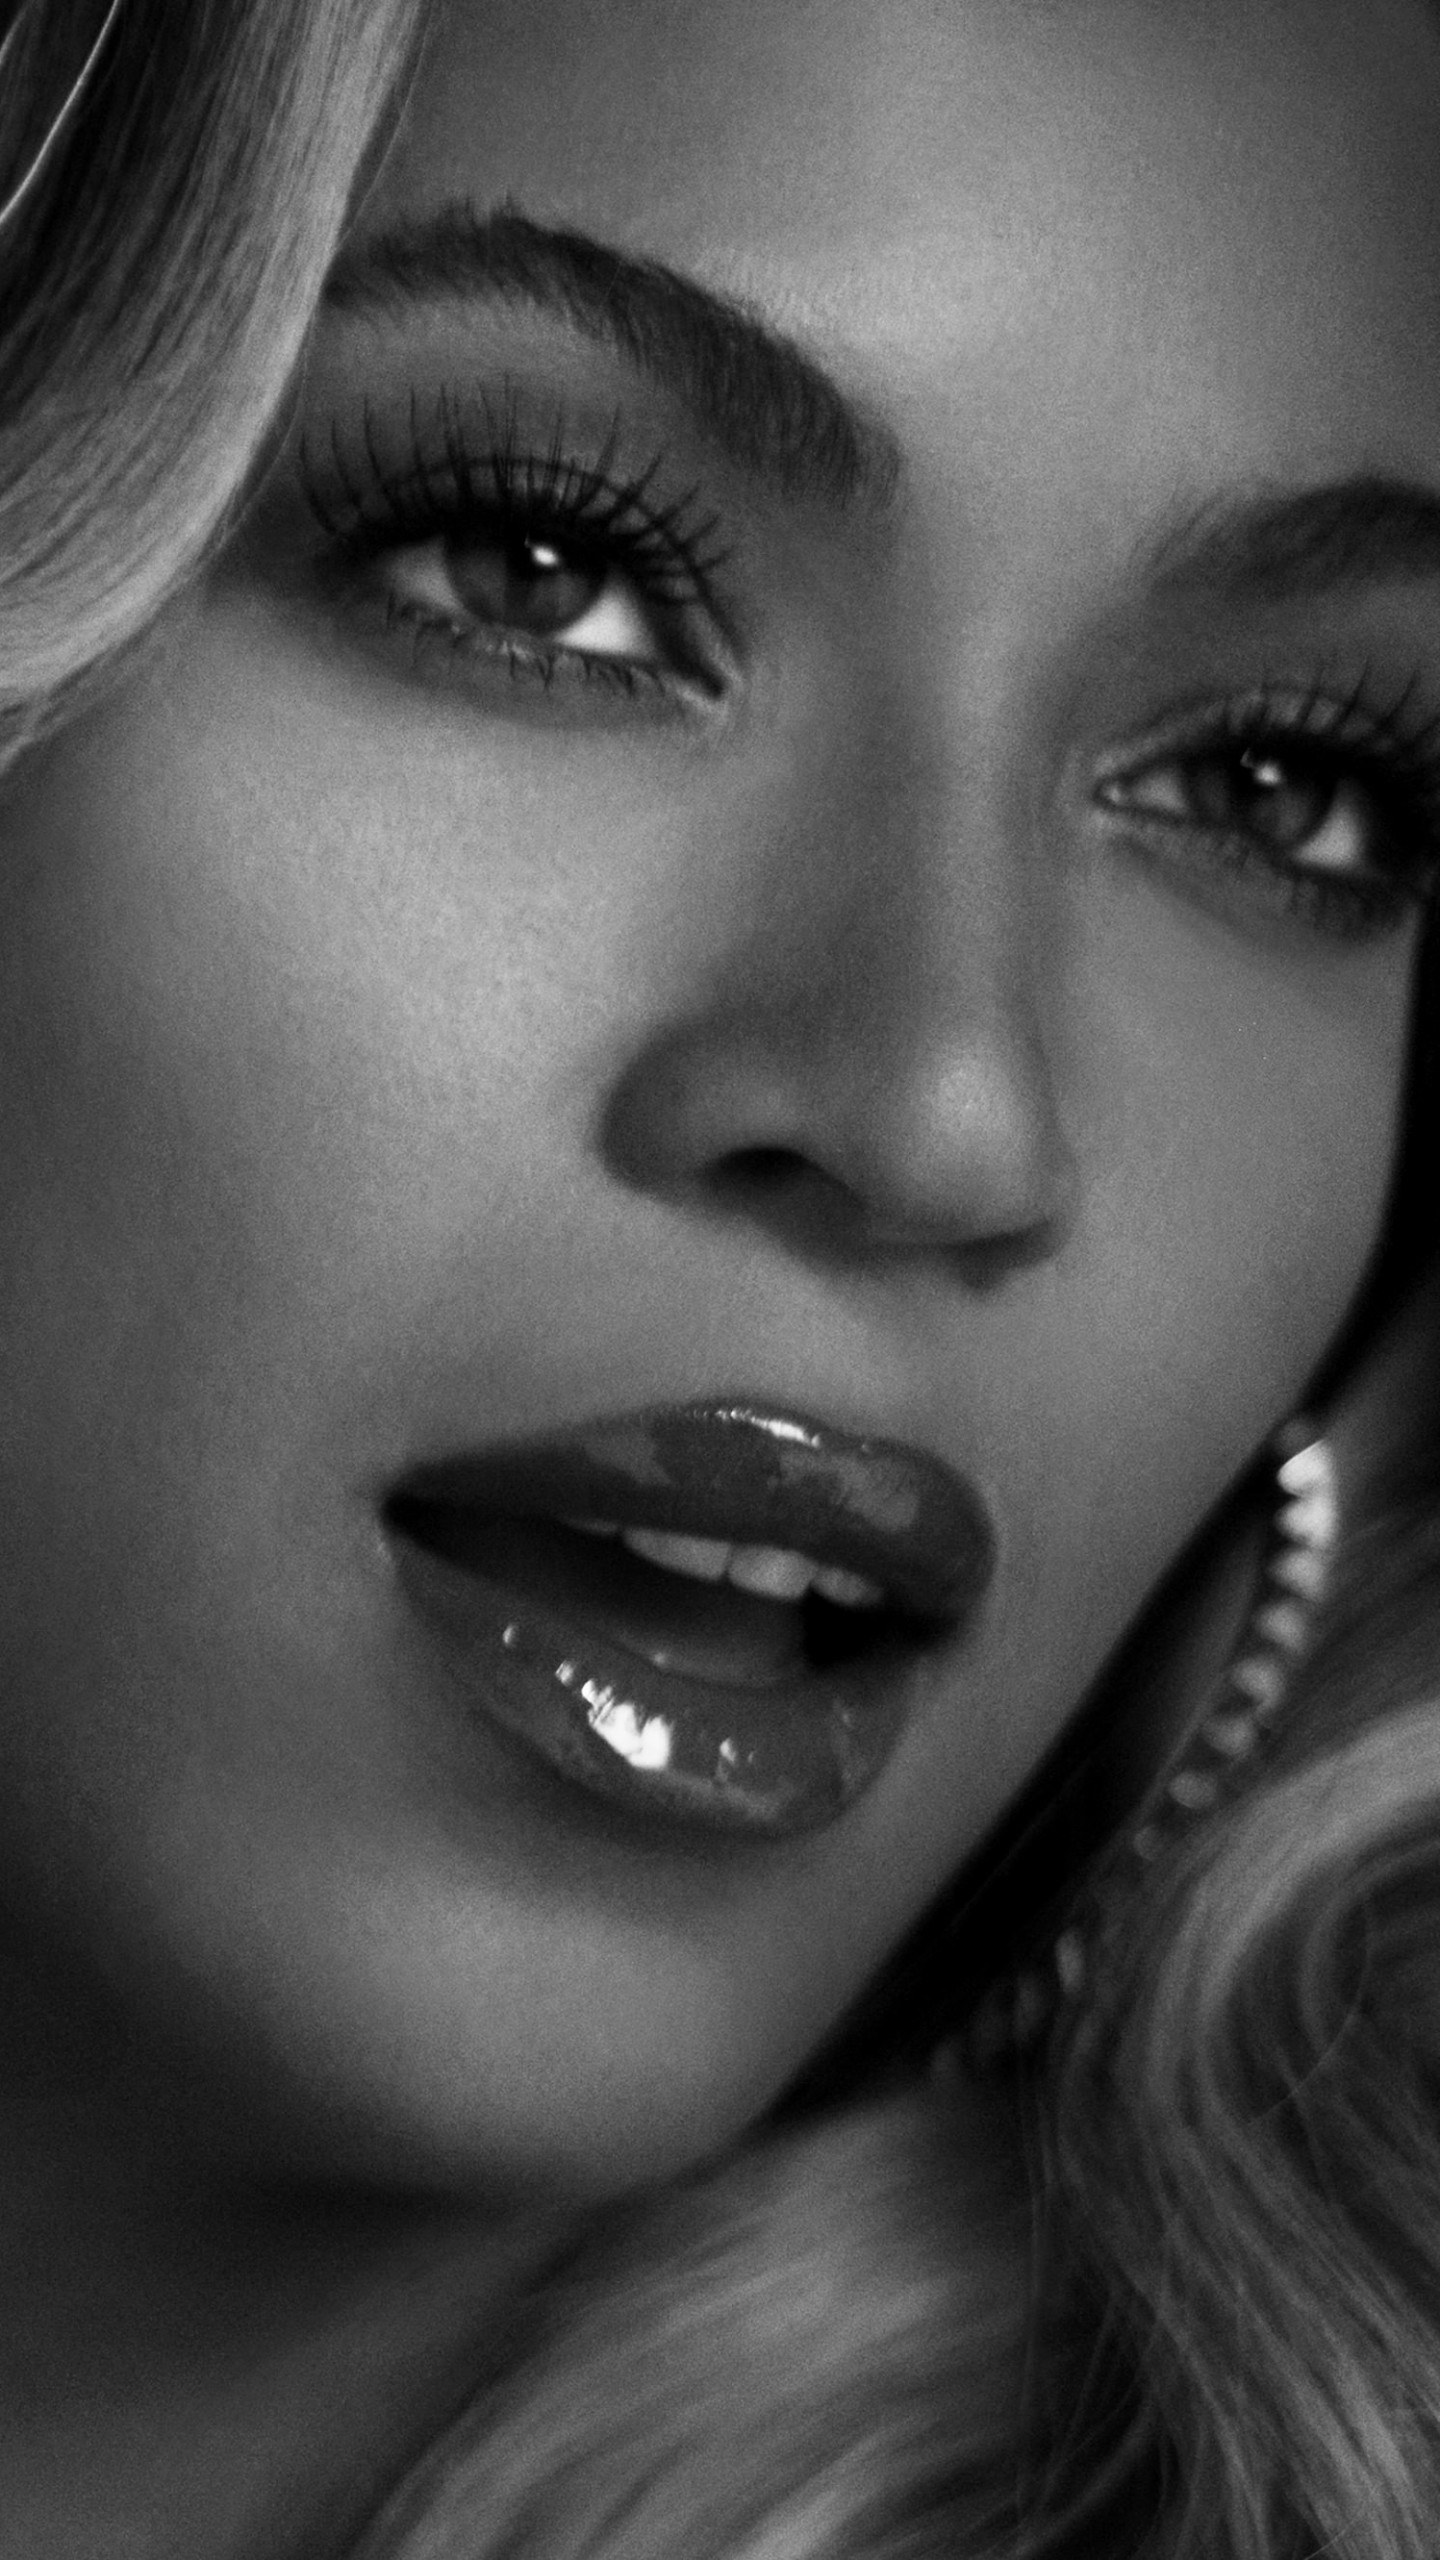 Beyonce in Black & White Wallpaper for SAMSUNG Galaxy S6